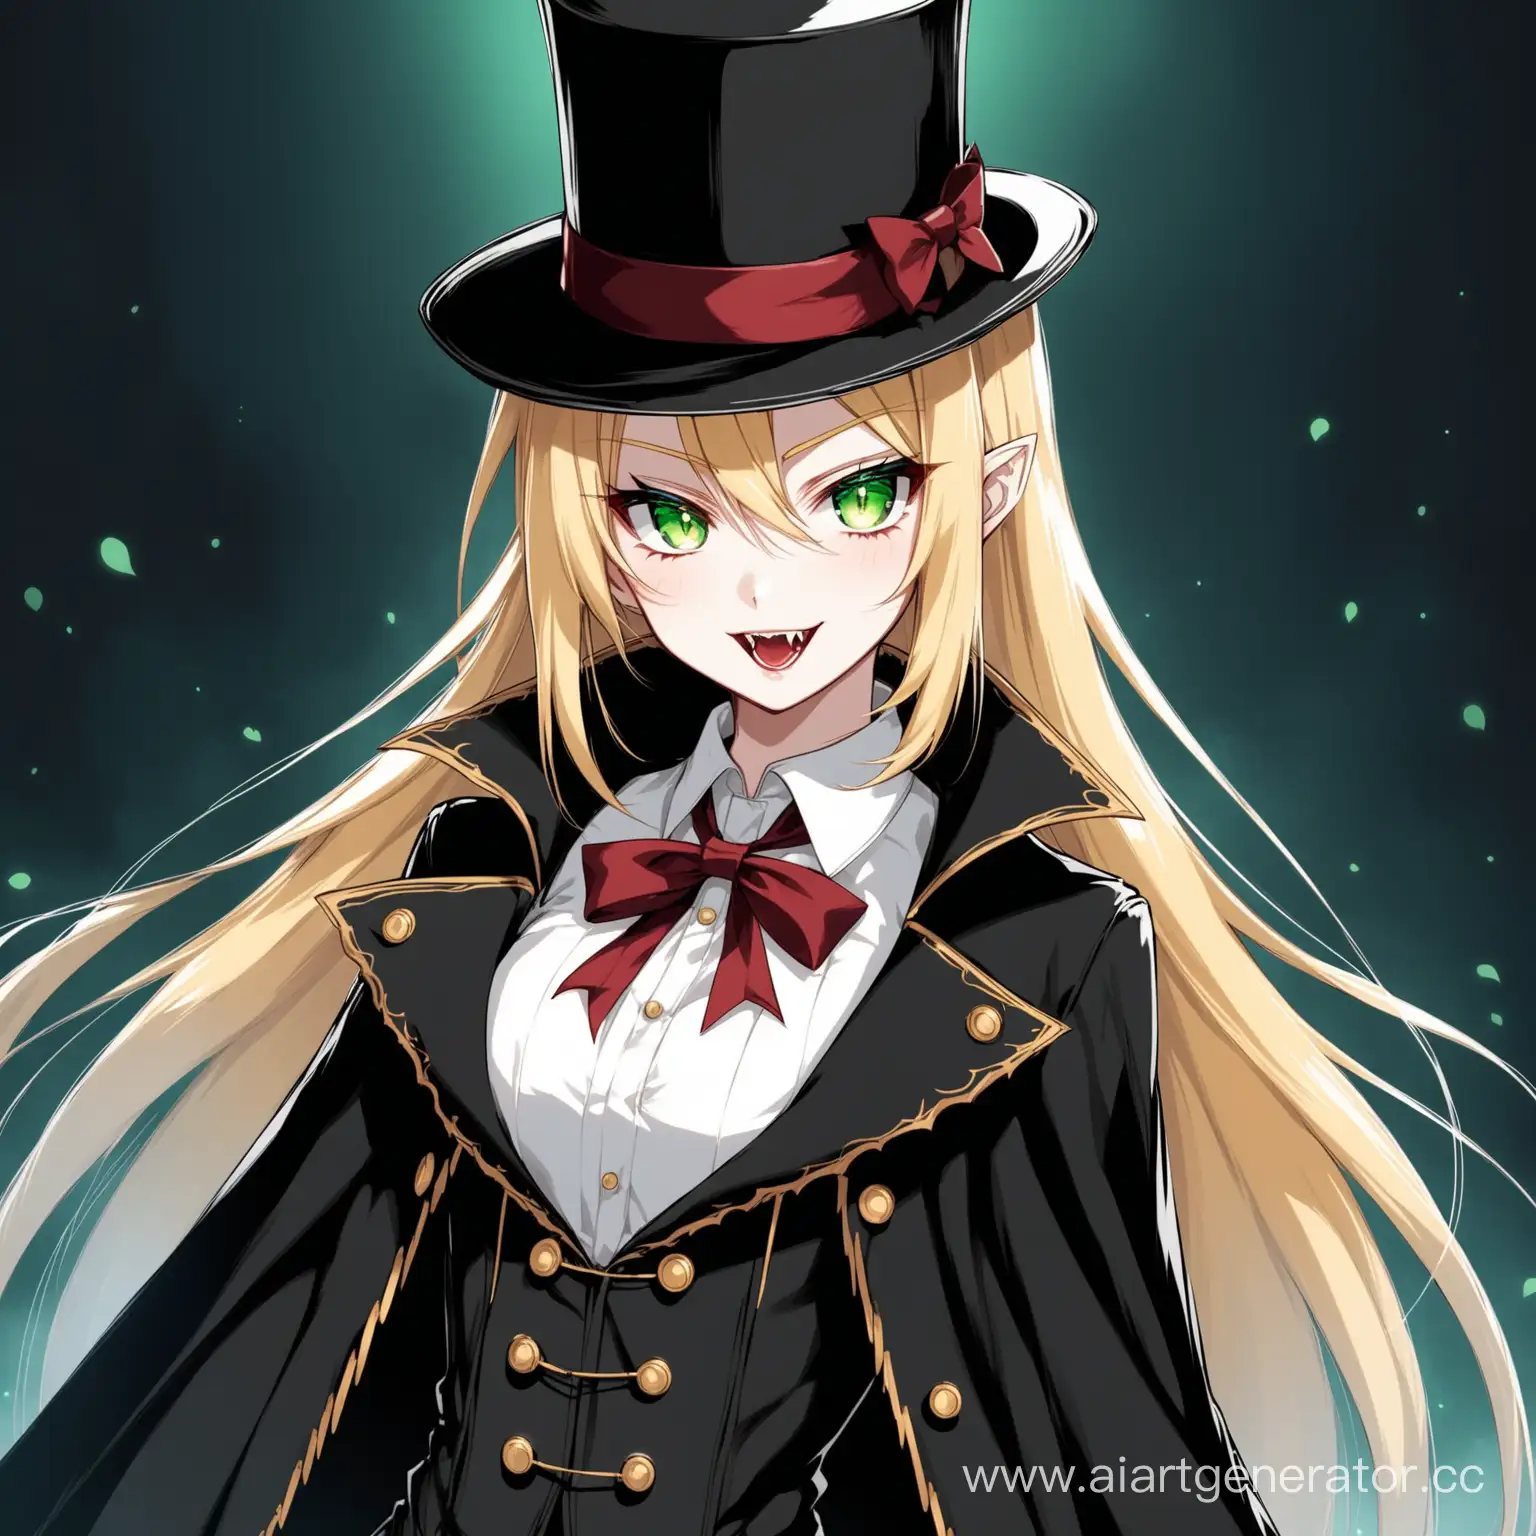 Blond-Anime-Girl-Vampire-with-Green-Eyes-and-a-White-Top-Hat-in-Black-Coat